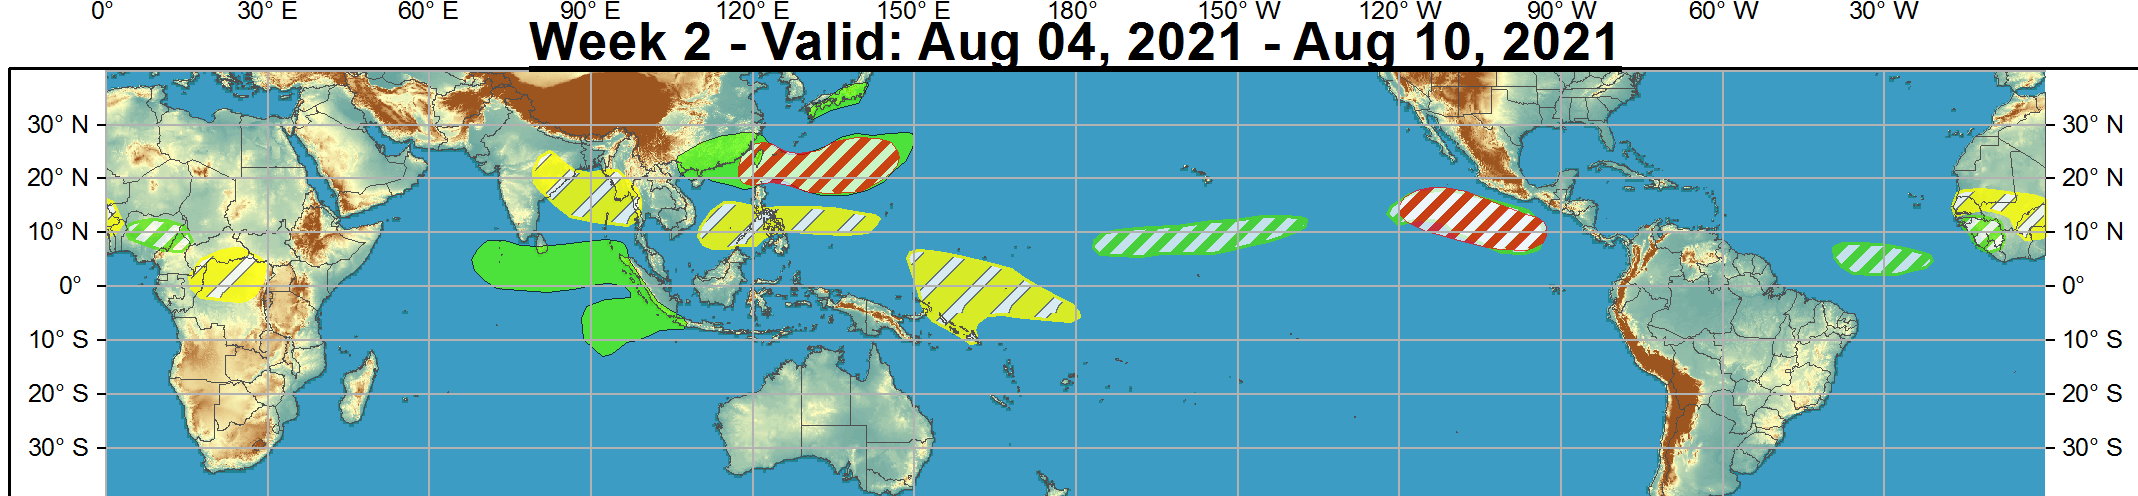 A favorable environment for additional tropical cyclone development is forecast to persist into Week-2, prompting a moderate confidence hazard on the outlook. No tropical cyclones are anticipated to form across the Main Development Region of the Atlantic during the outlook period, though conditions are anticipated to become slightly more favorable towards the end of Week-2, with dynamical models showing a disturbance emerging off the coast of Africa. Should the MJO or additional Kelvin waves cross the Western Hemisphere during Week-2, conditions may become more favorable for development during the Week-34 time frame. NOAA.